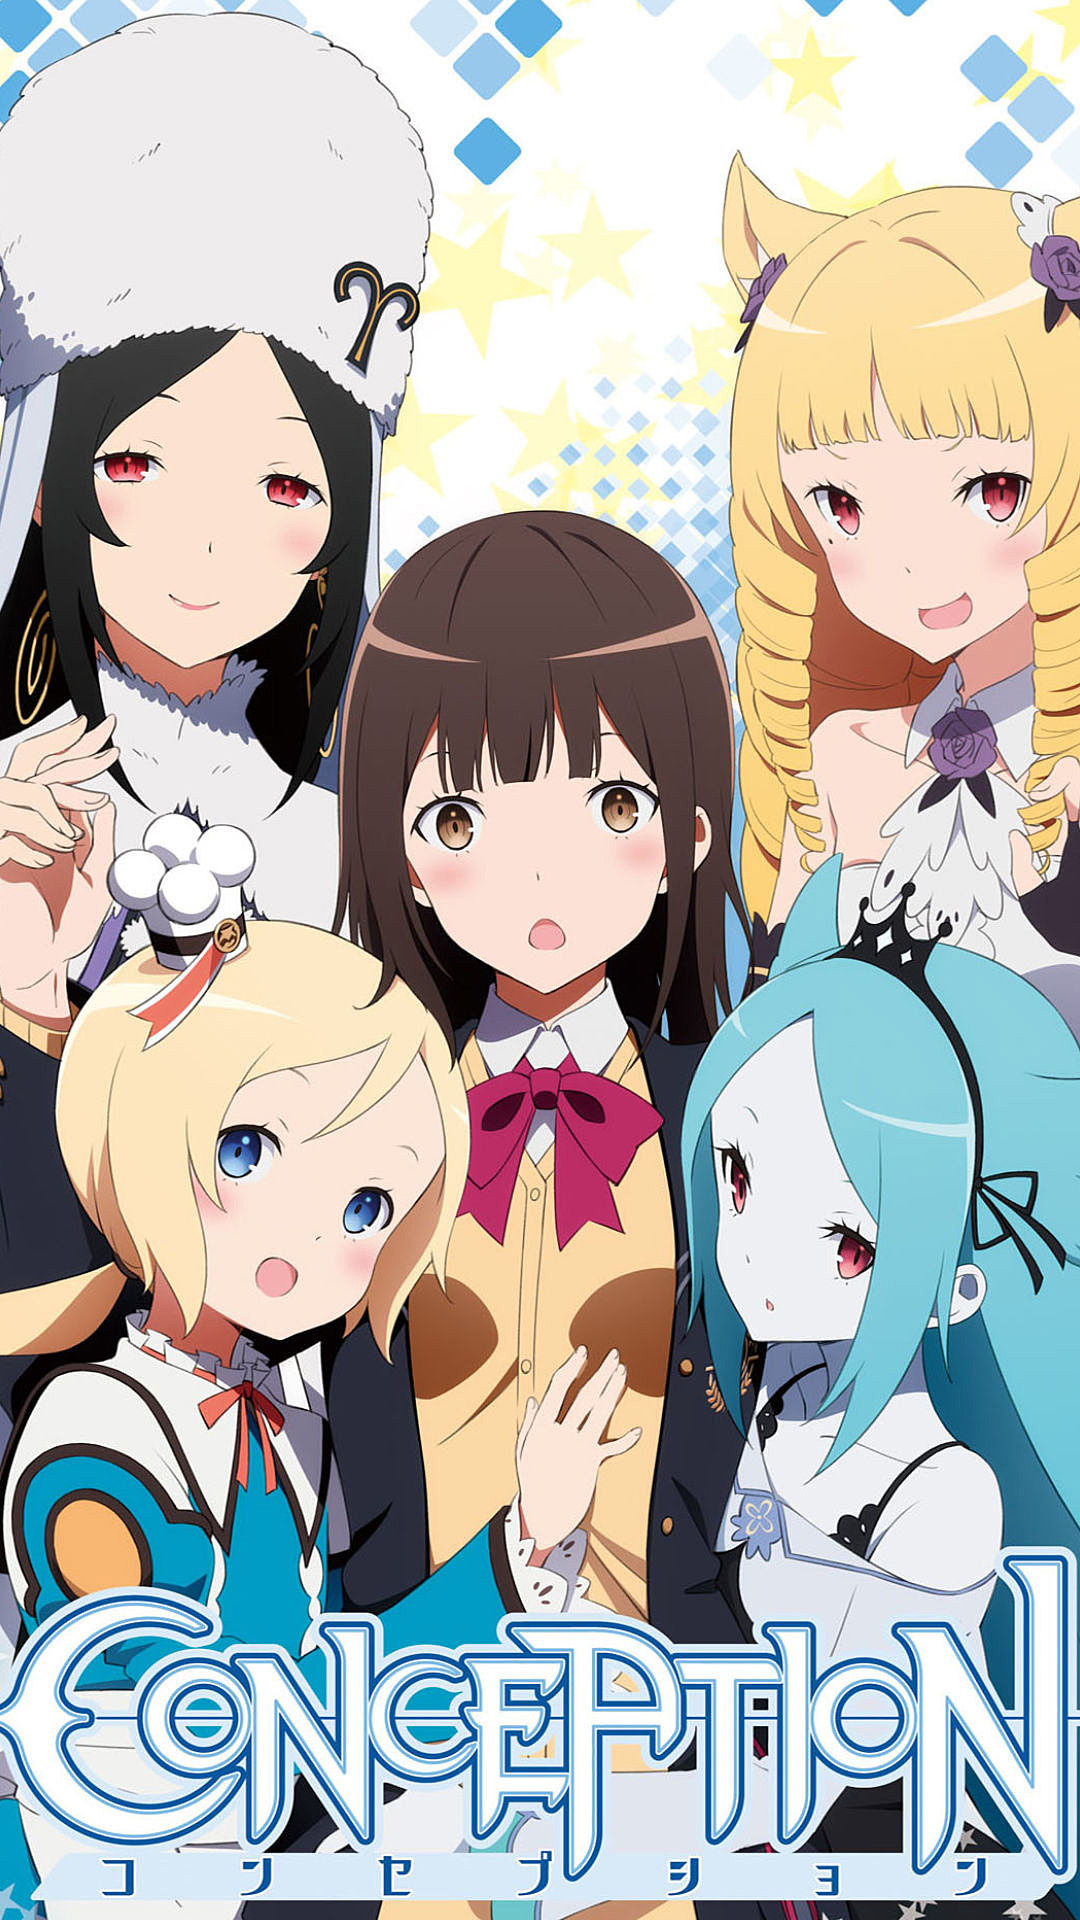 Conception Iphone壁紙 Androidスマホ壁紙画像 2 アニメ壁紙ネット Pc Android Iphone壁紙 画像